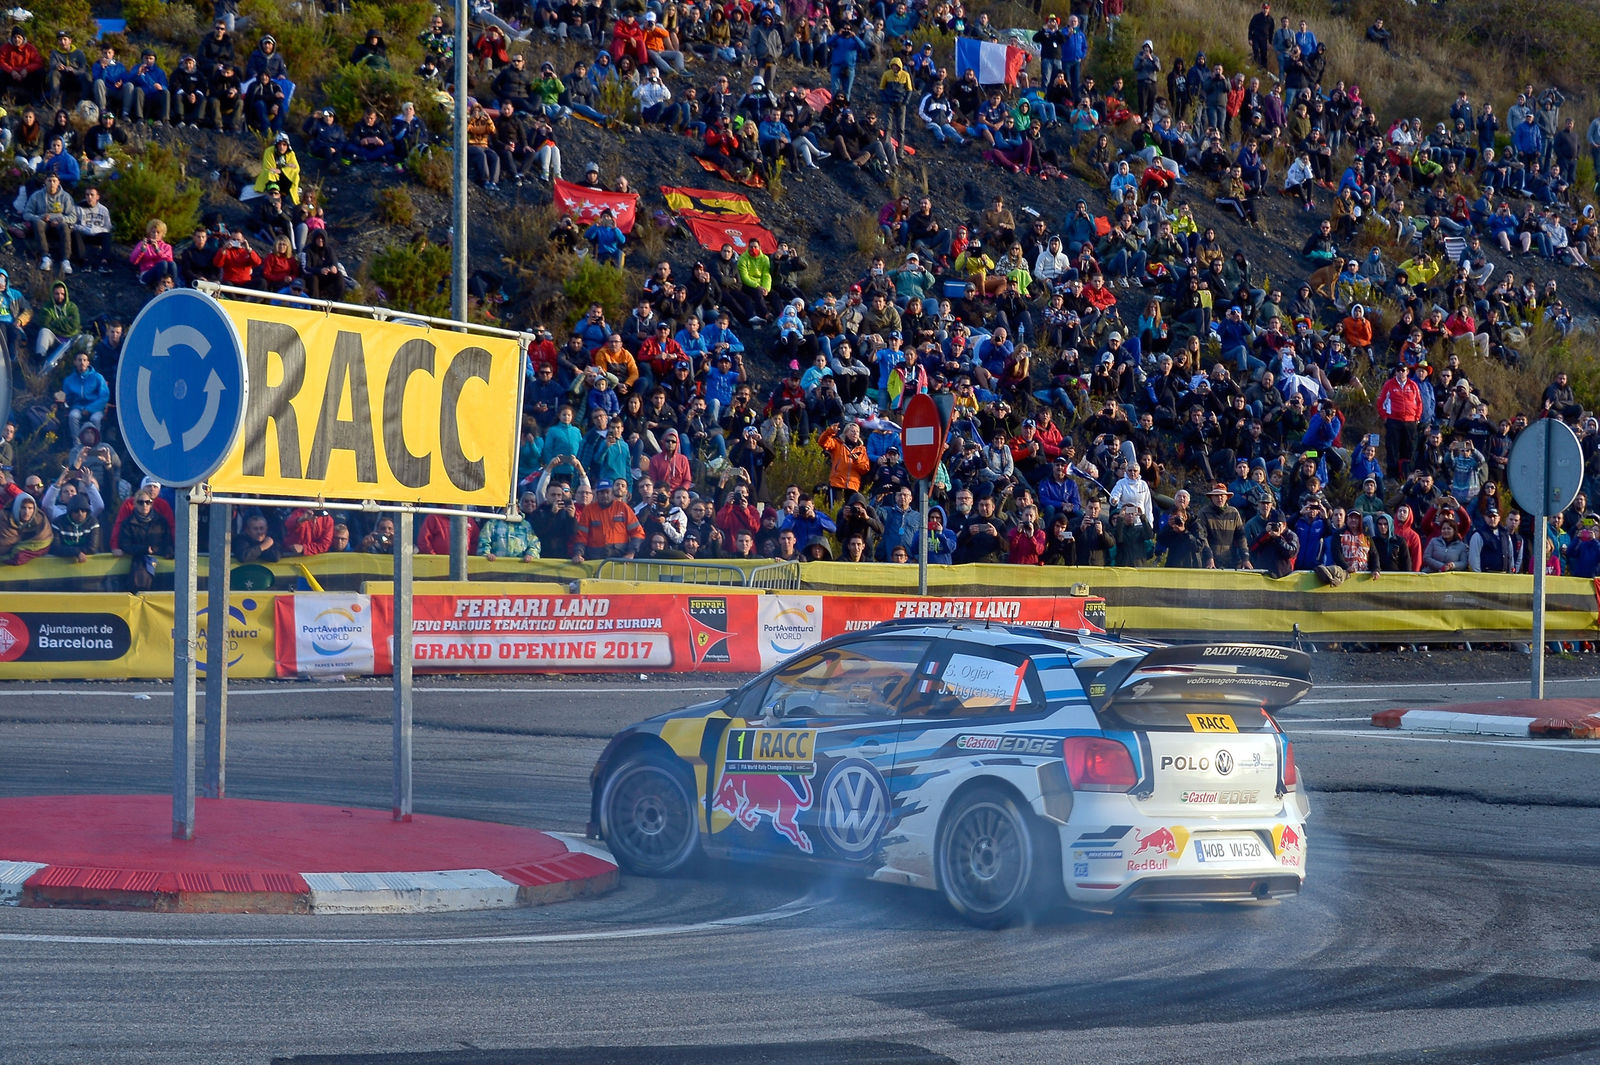 Champions, champions, champions, champions*! Ogier/Ingrassia claim fourth WRC title in a row with Volkswagen